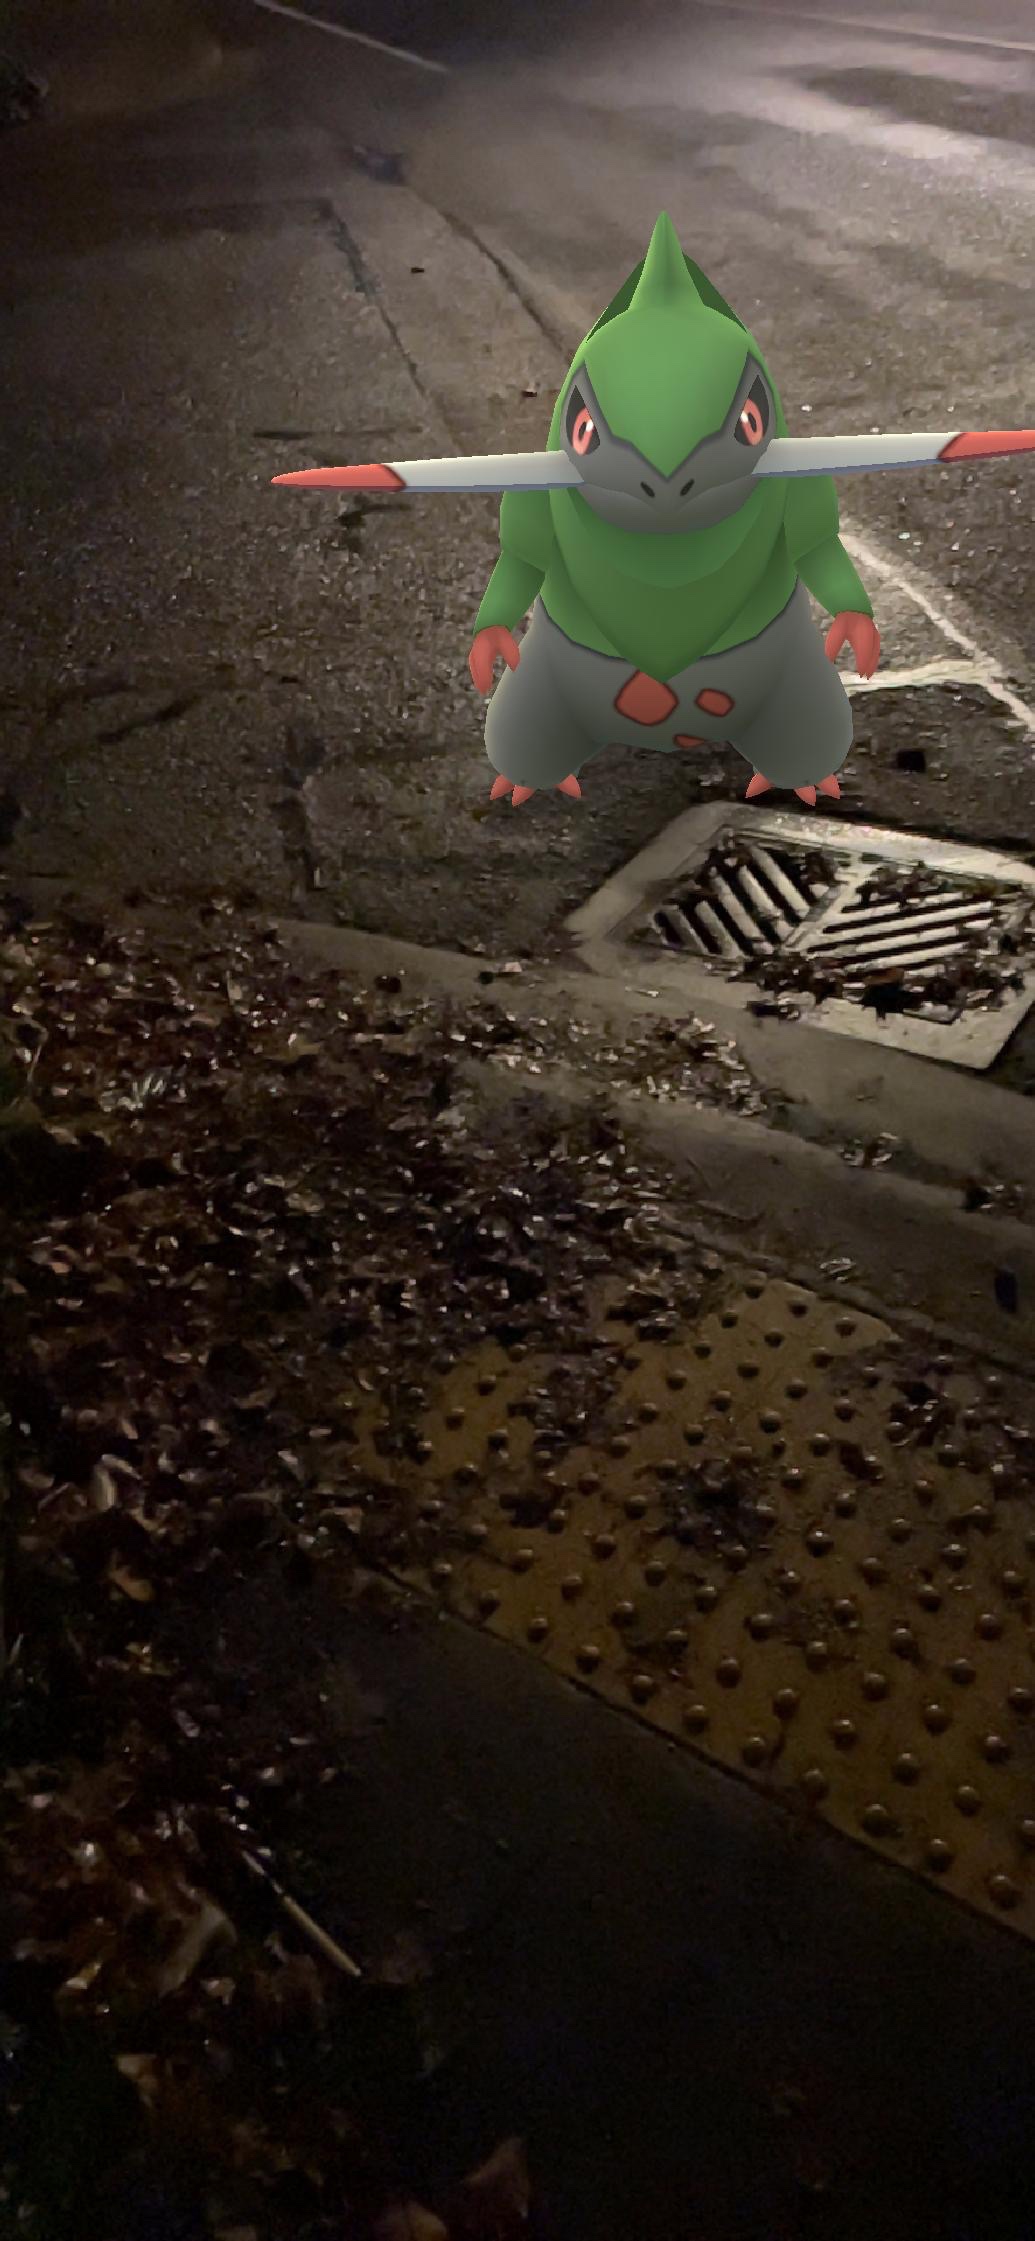 "Fraxure" Pokemon standing next to a street drain